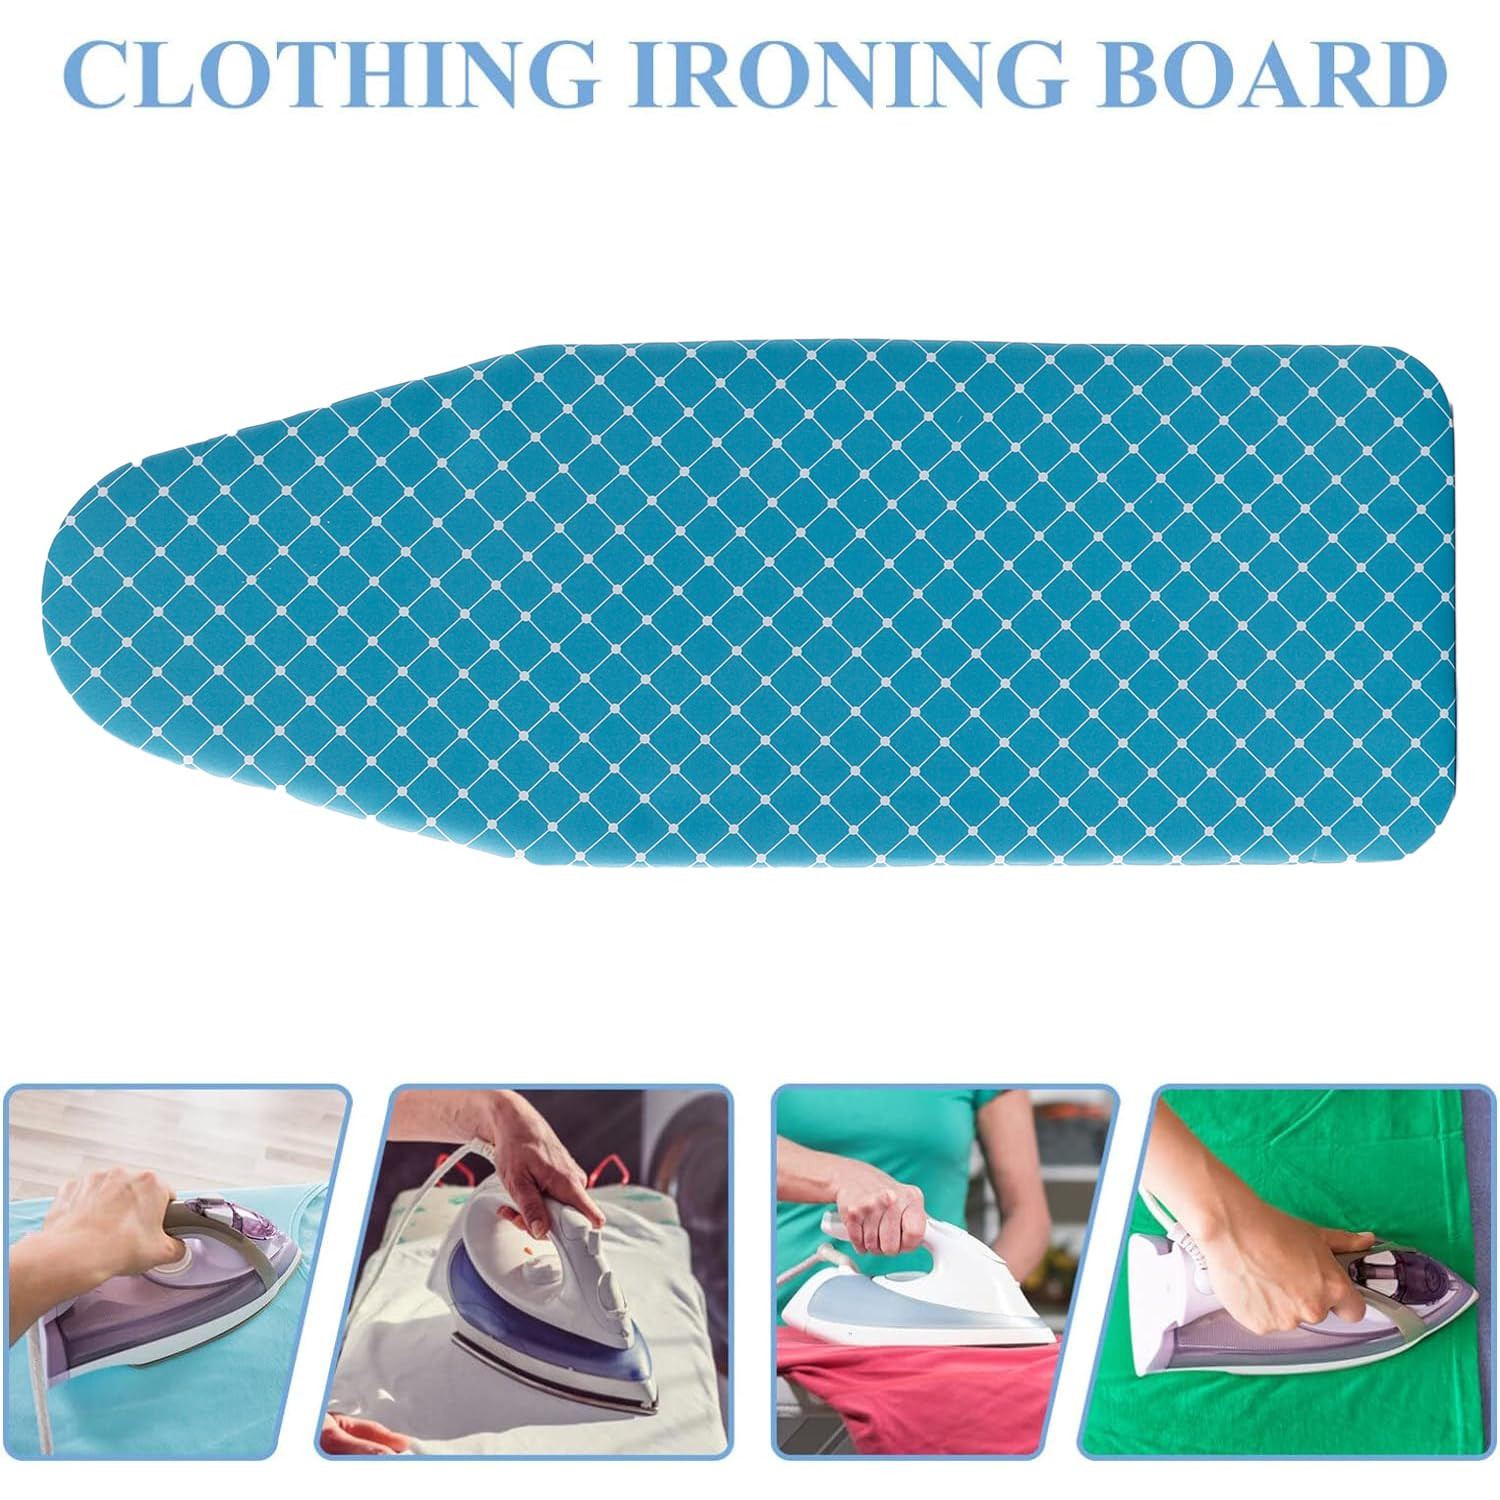 Kuber Industries Tabletop Ironing Board|Ironing Stand For Clothes|Press Table Stand For Home (Blue)